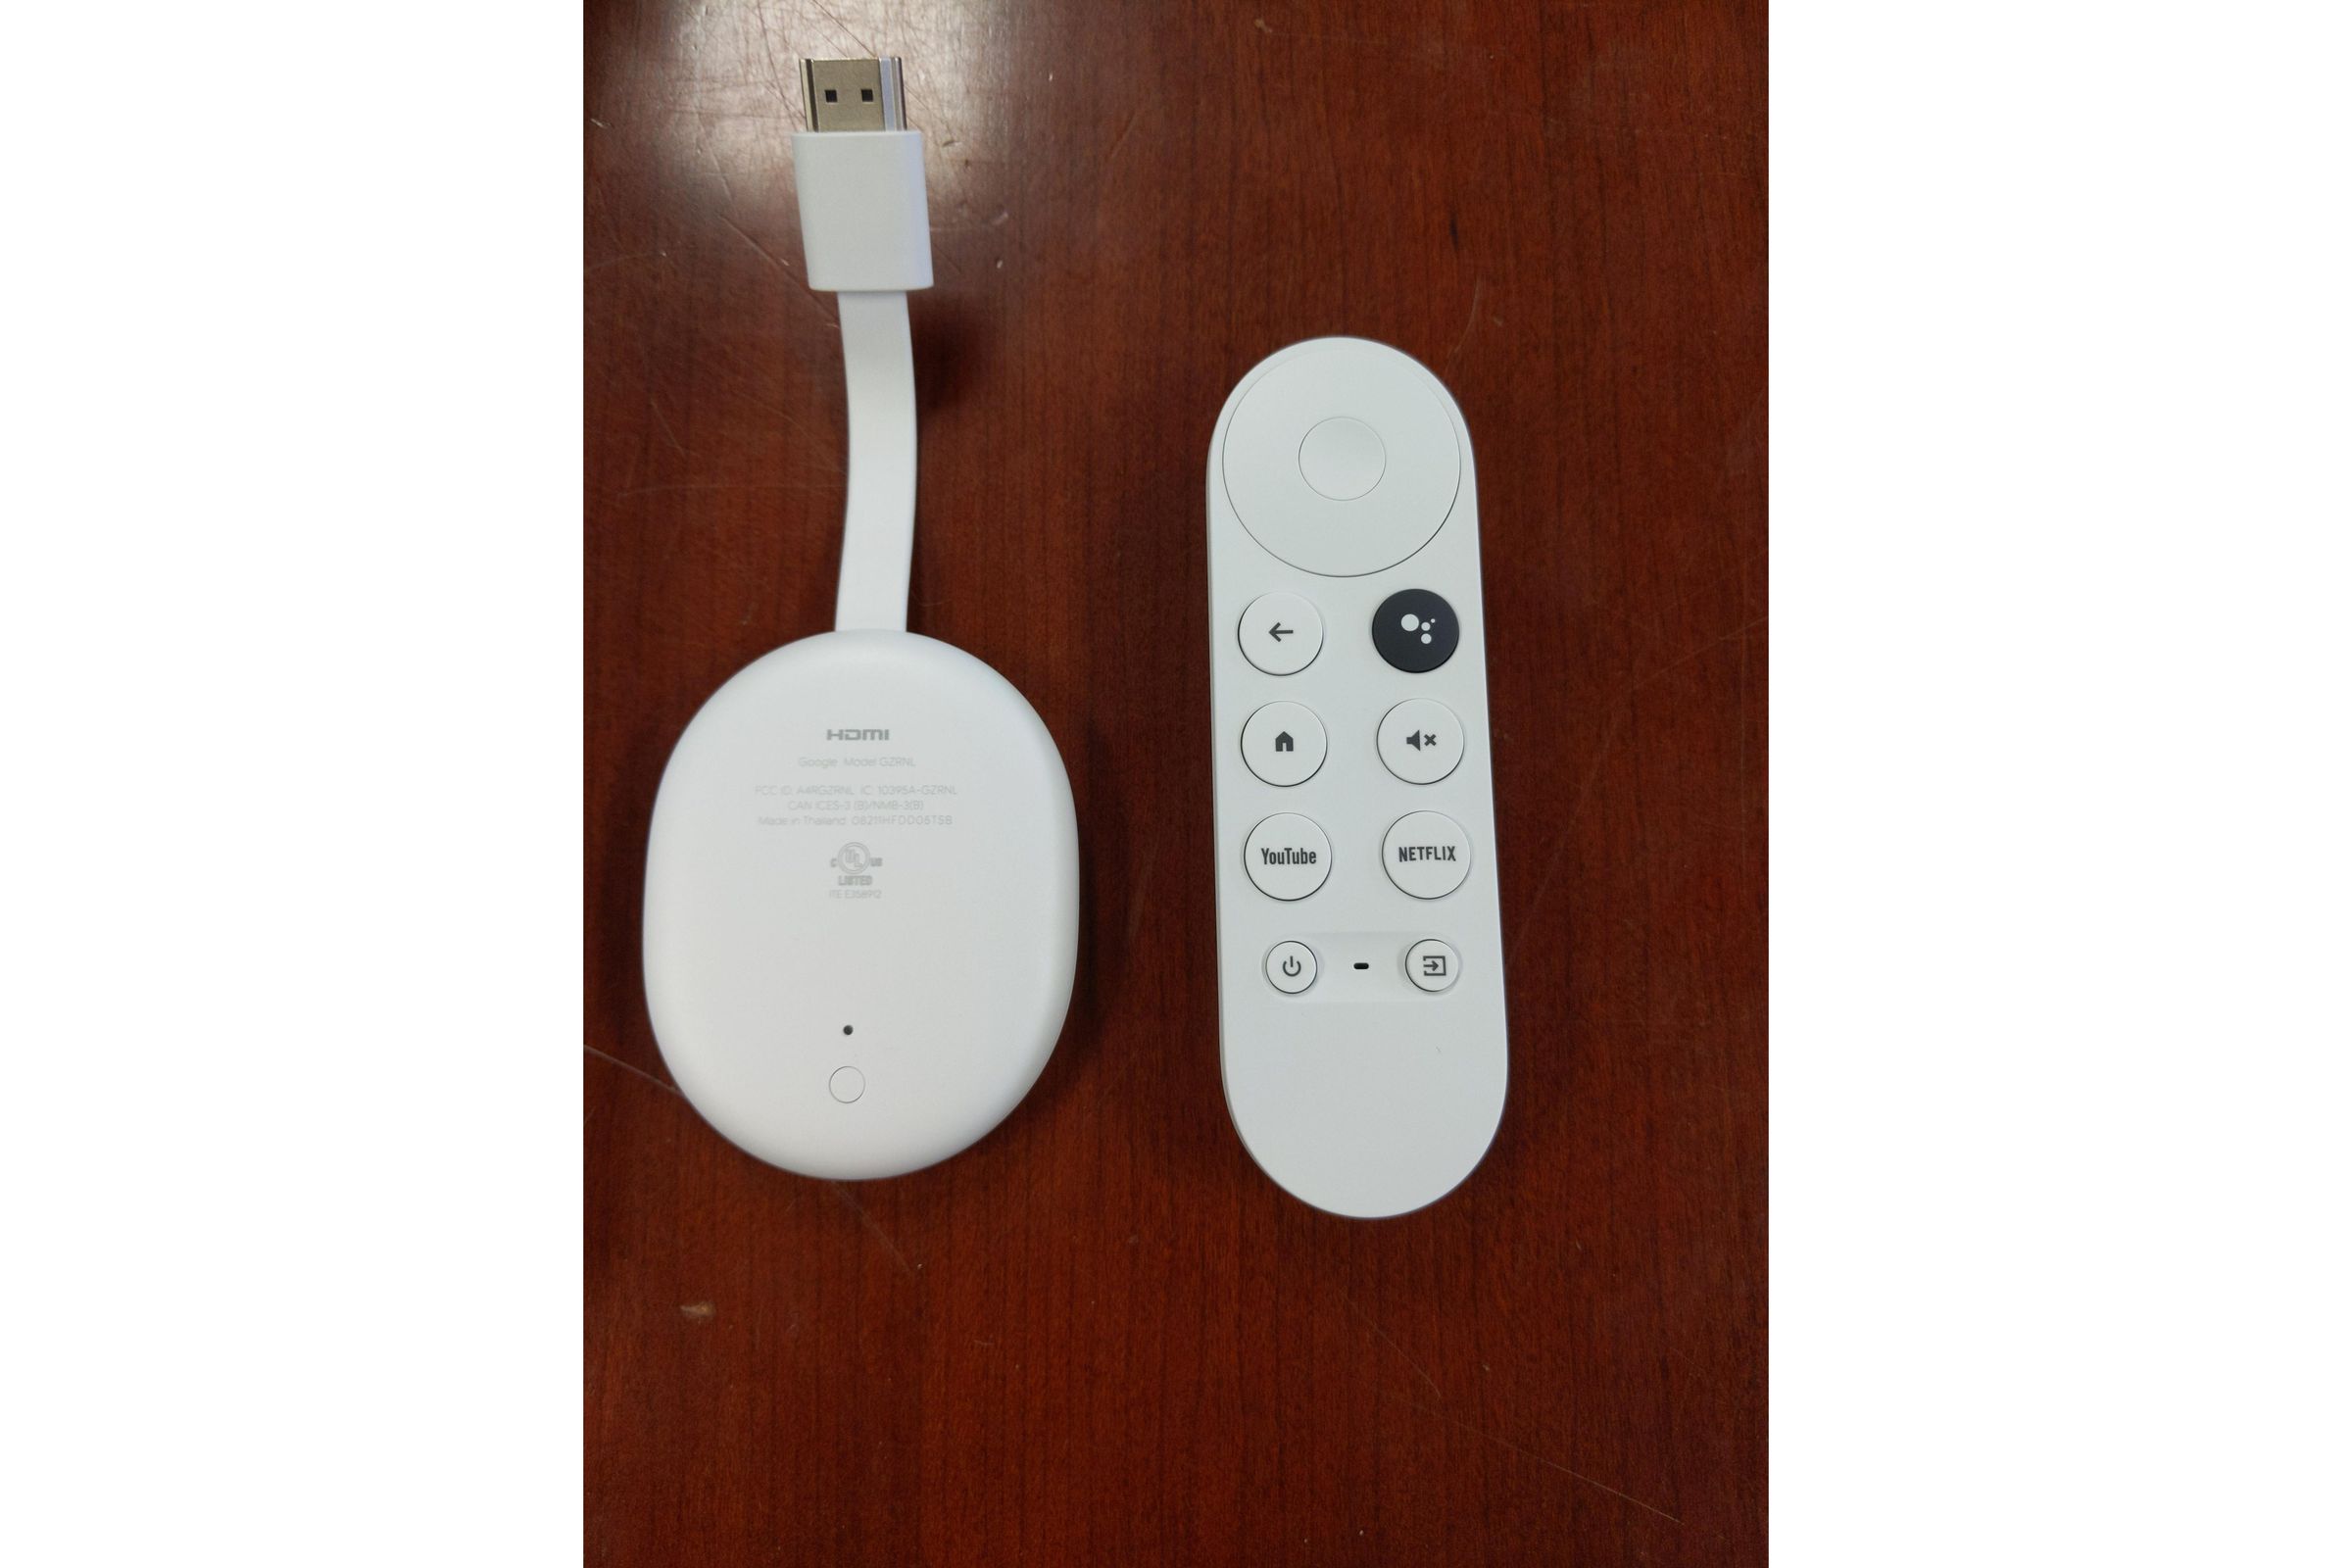 Photos show off the dongle and its remote control.